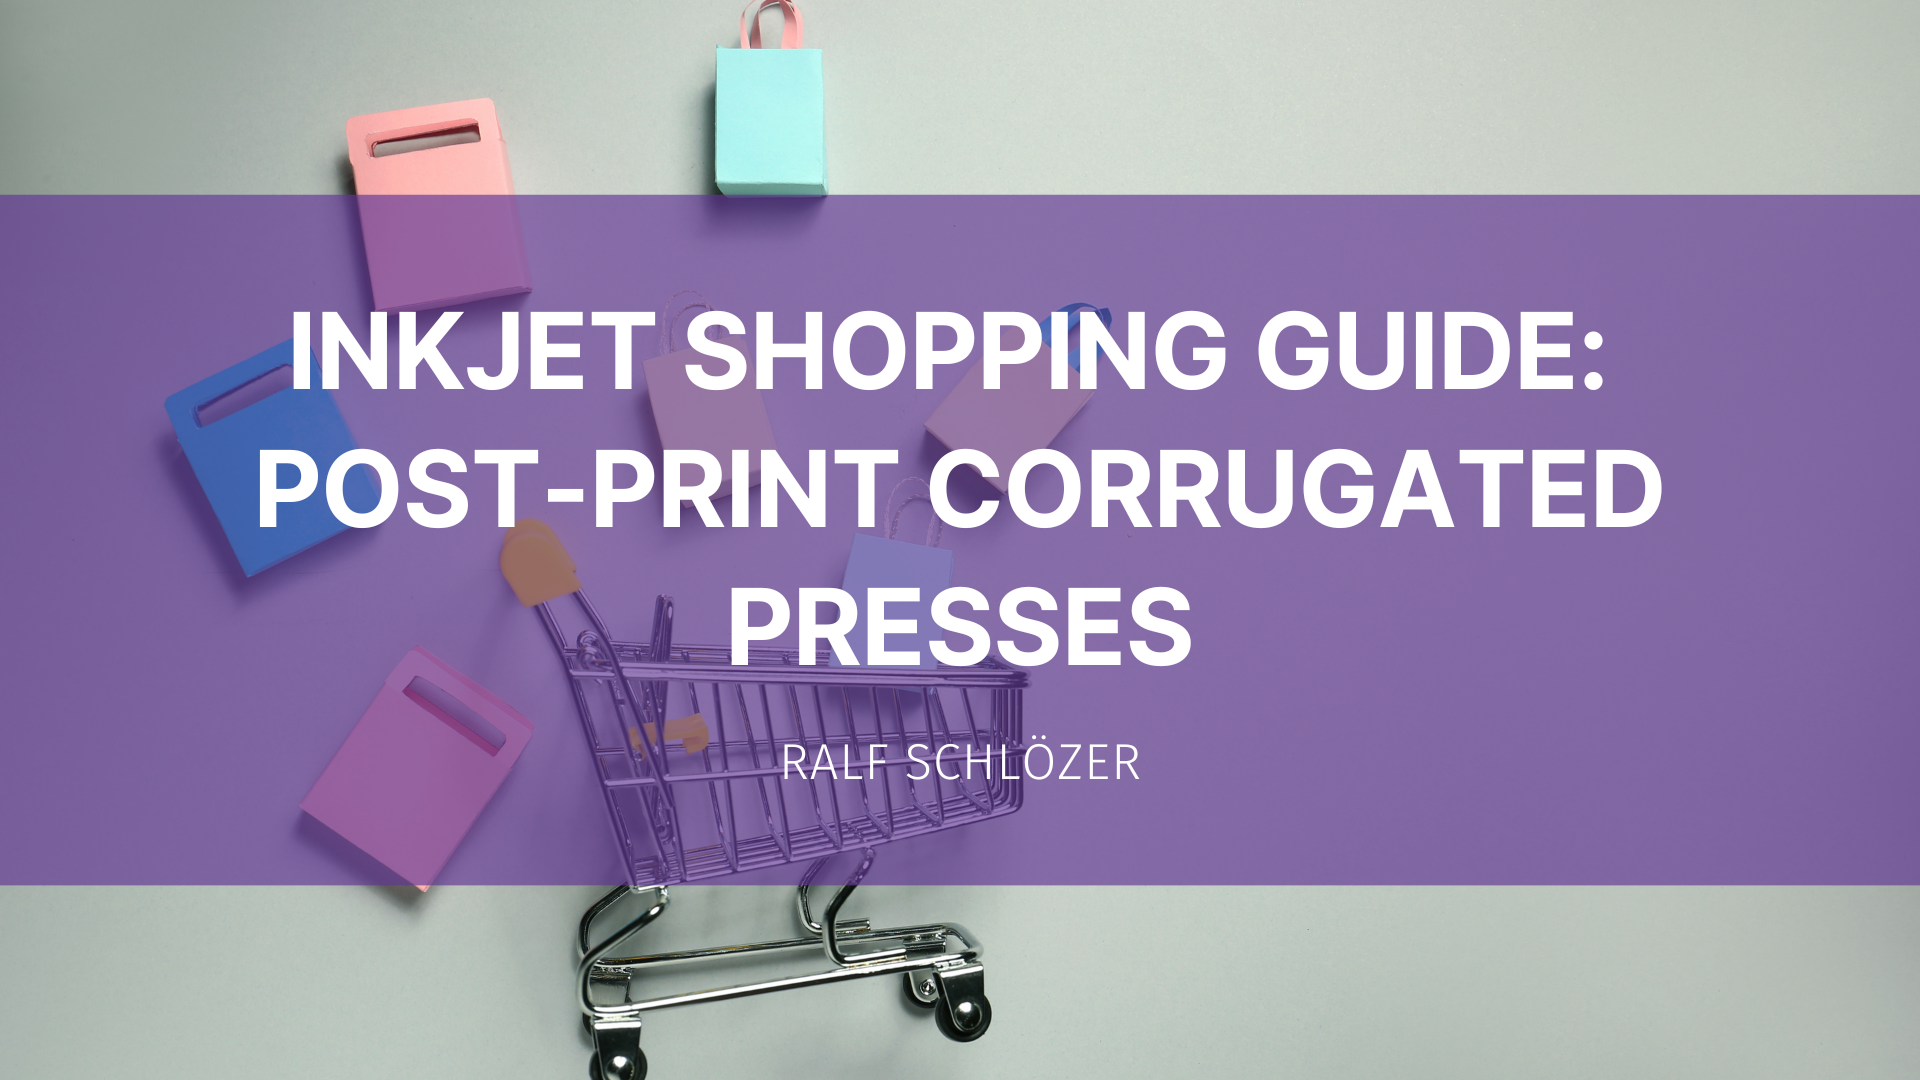 Featured image for “2023 Inkjet Shopping Guide for Post-Print Corrugated Presses”